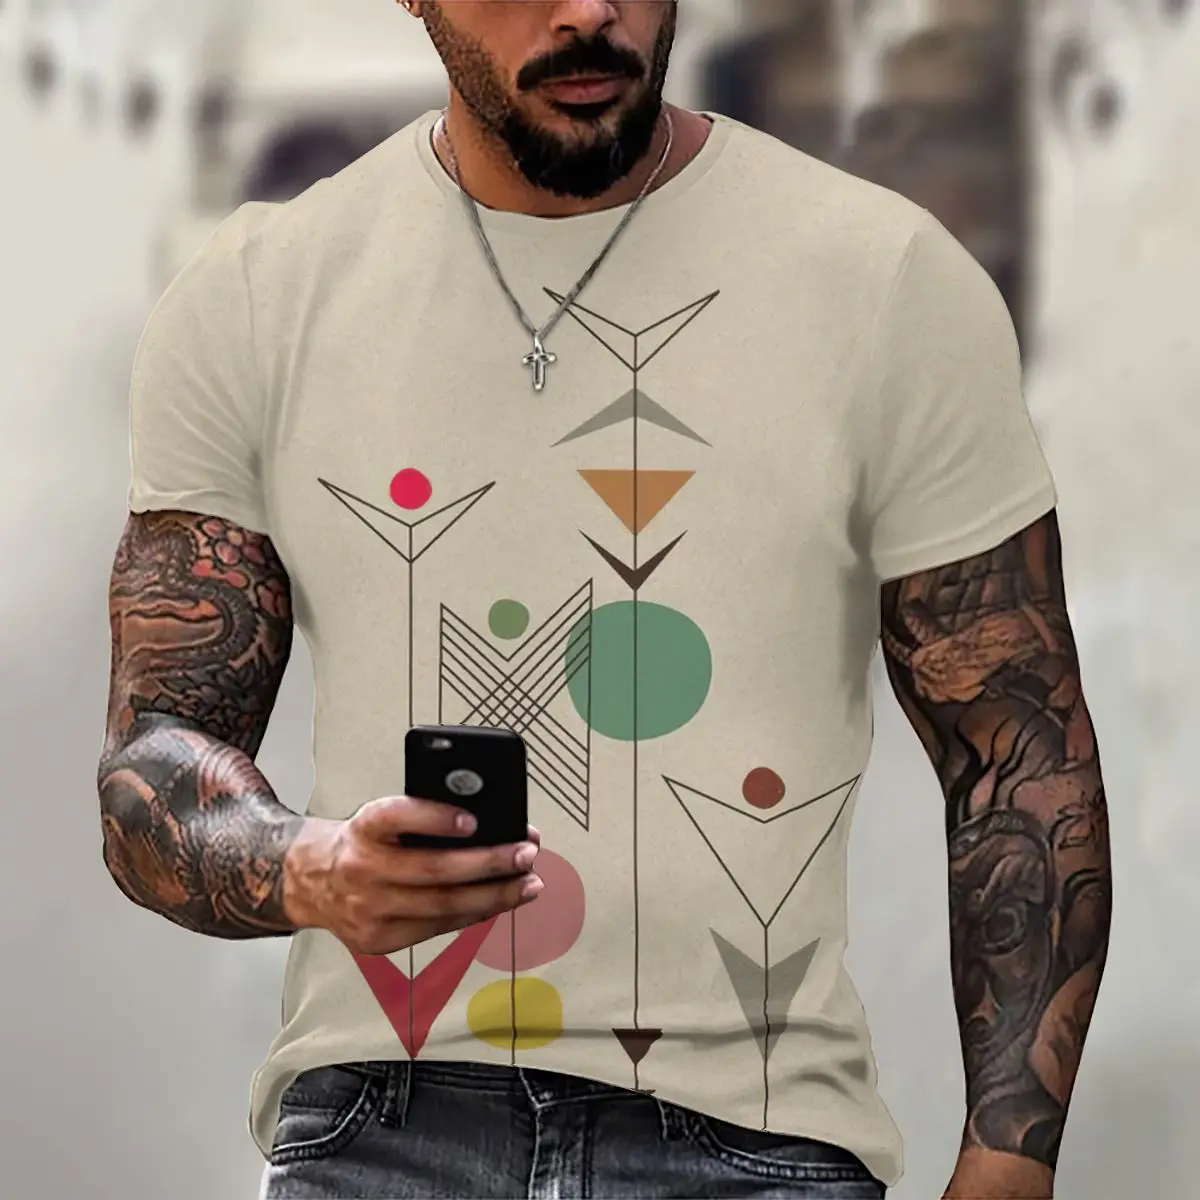 Фото - Simple 3D Graphic Printing Loose Men's Shirt Summer Breathable Streetwear T Shirt Short Sleeve T-shirts Streetwear T Shirt Tops new clown back to the soul night graphic t shirt 3d printing men s t shirt demon killer funny loose breathable short sleeves